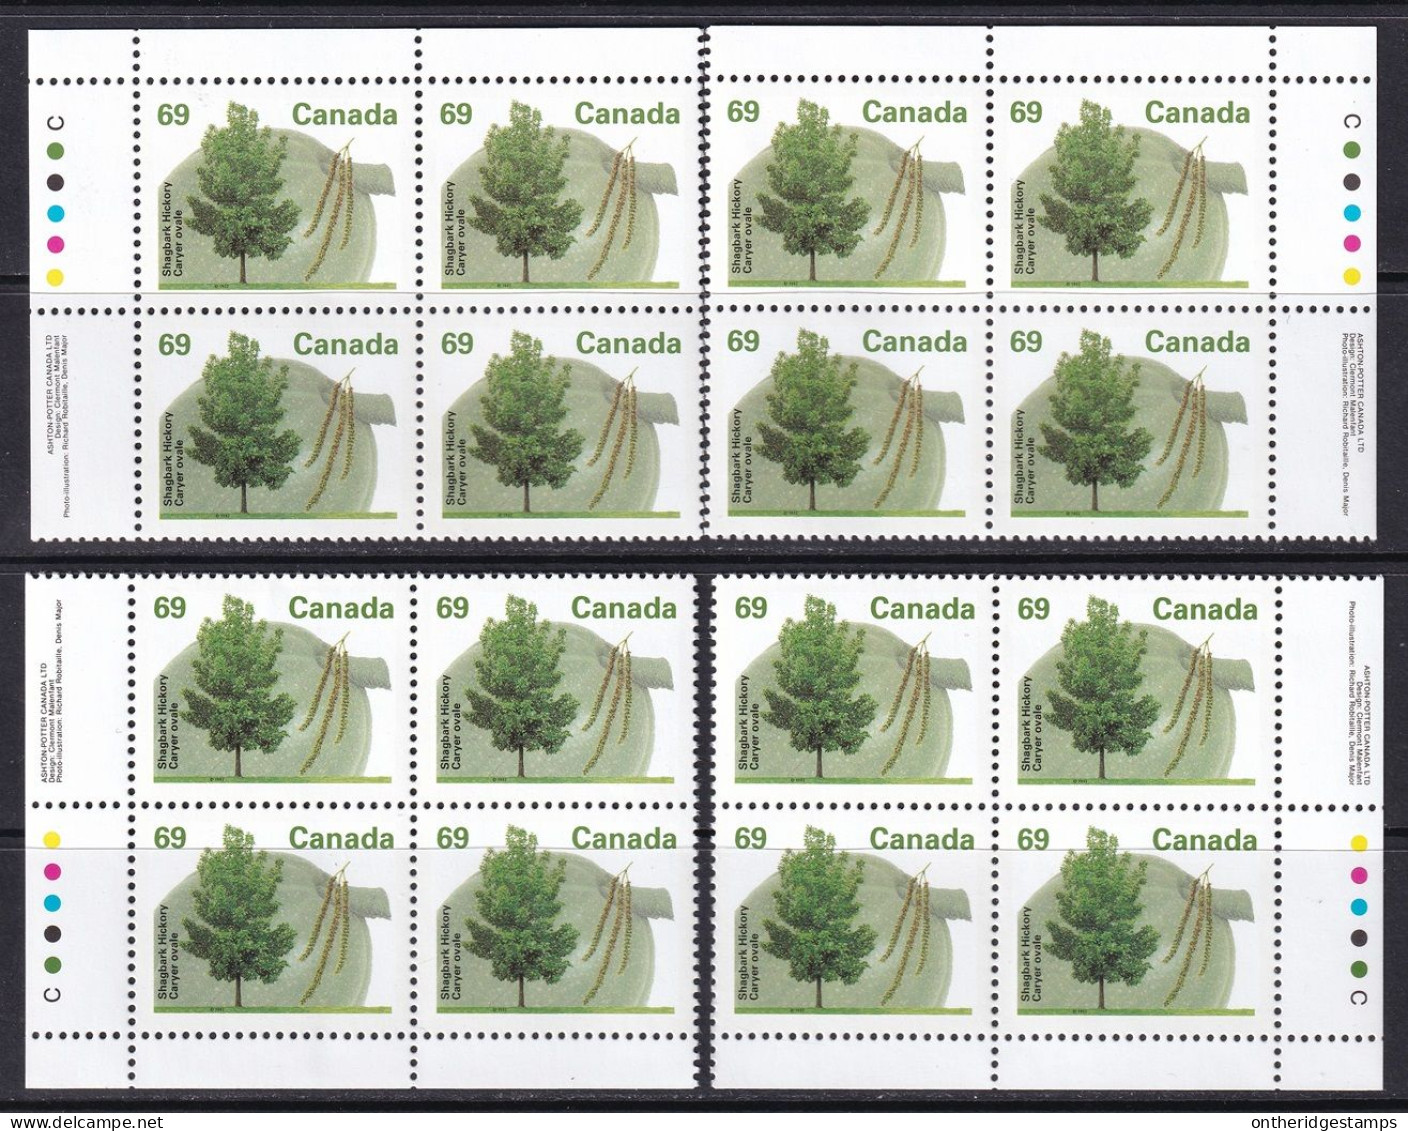 Canada 1995 Sc 1369i  Plate Block Set MNH** Coated Papers - Unused Stamps